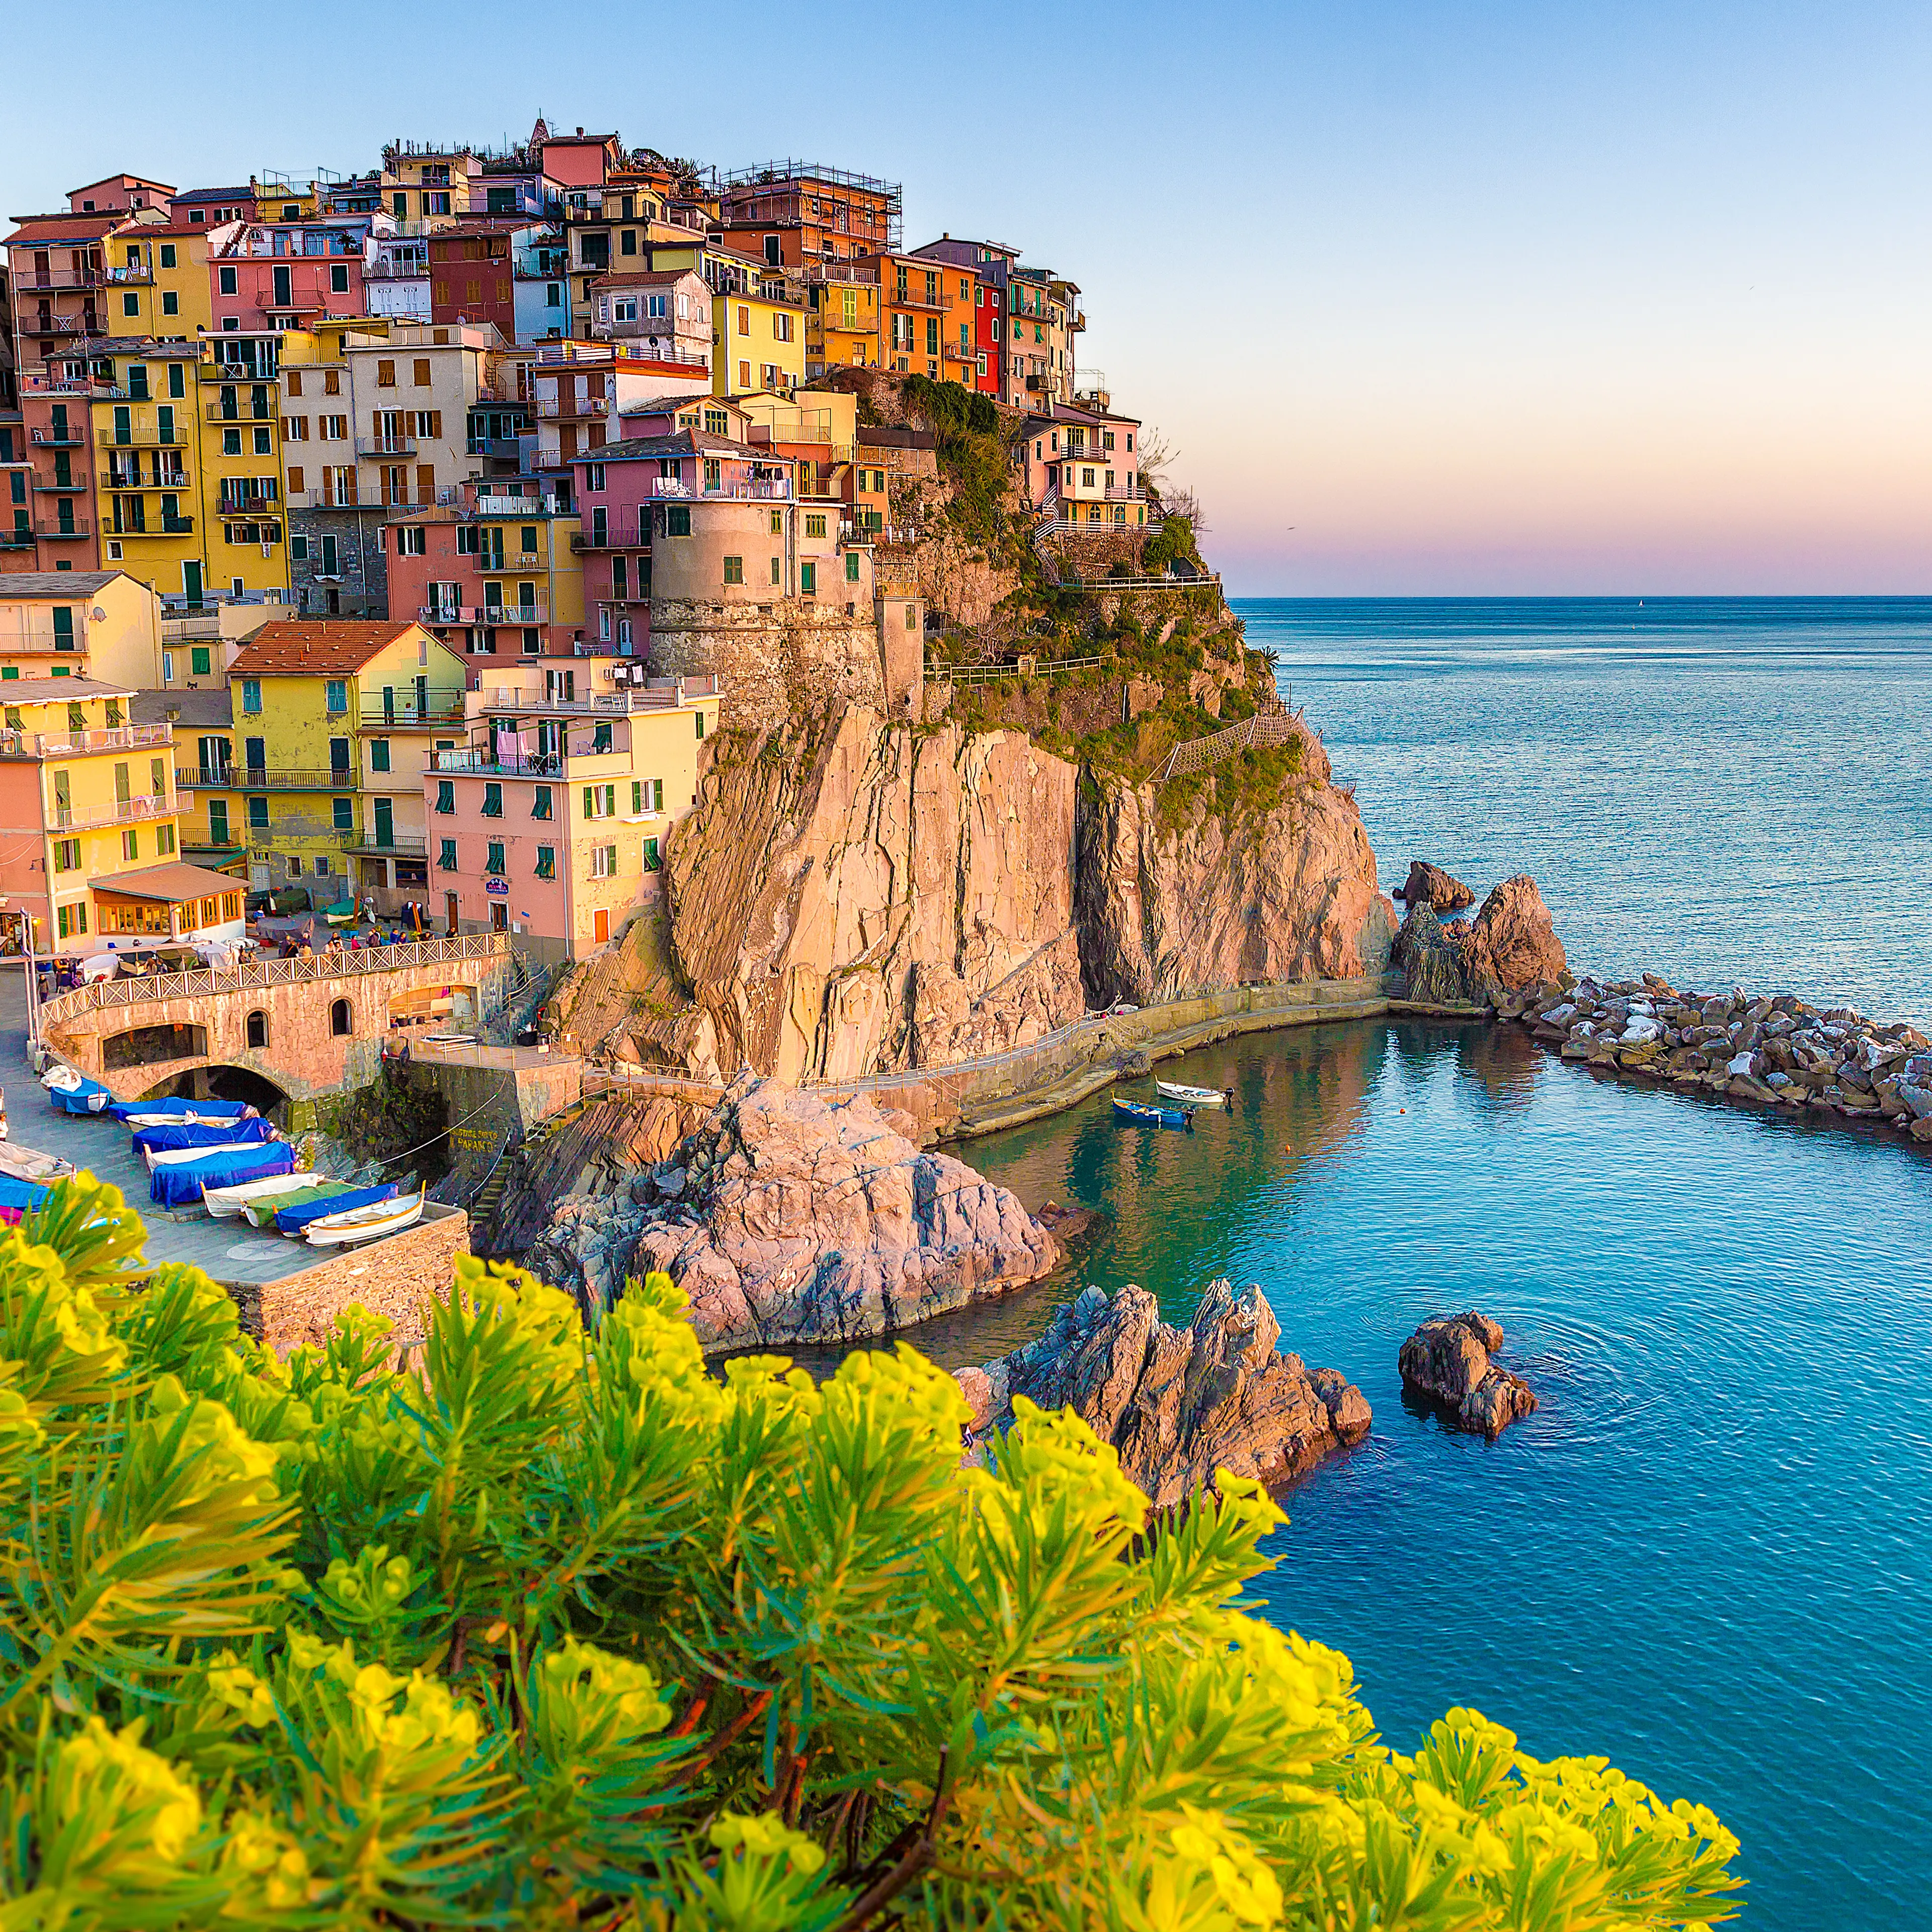 1-Day Family Food, Wine & Sightseeing Adventure in Cinque Terre